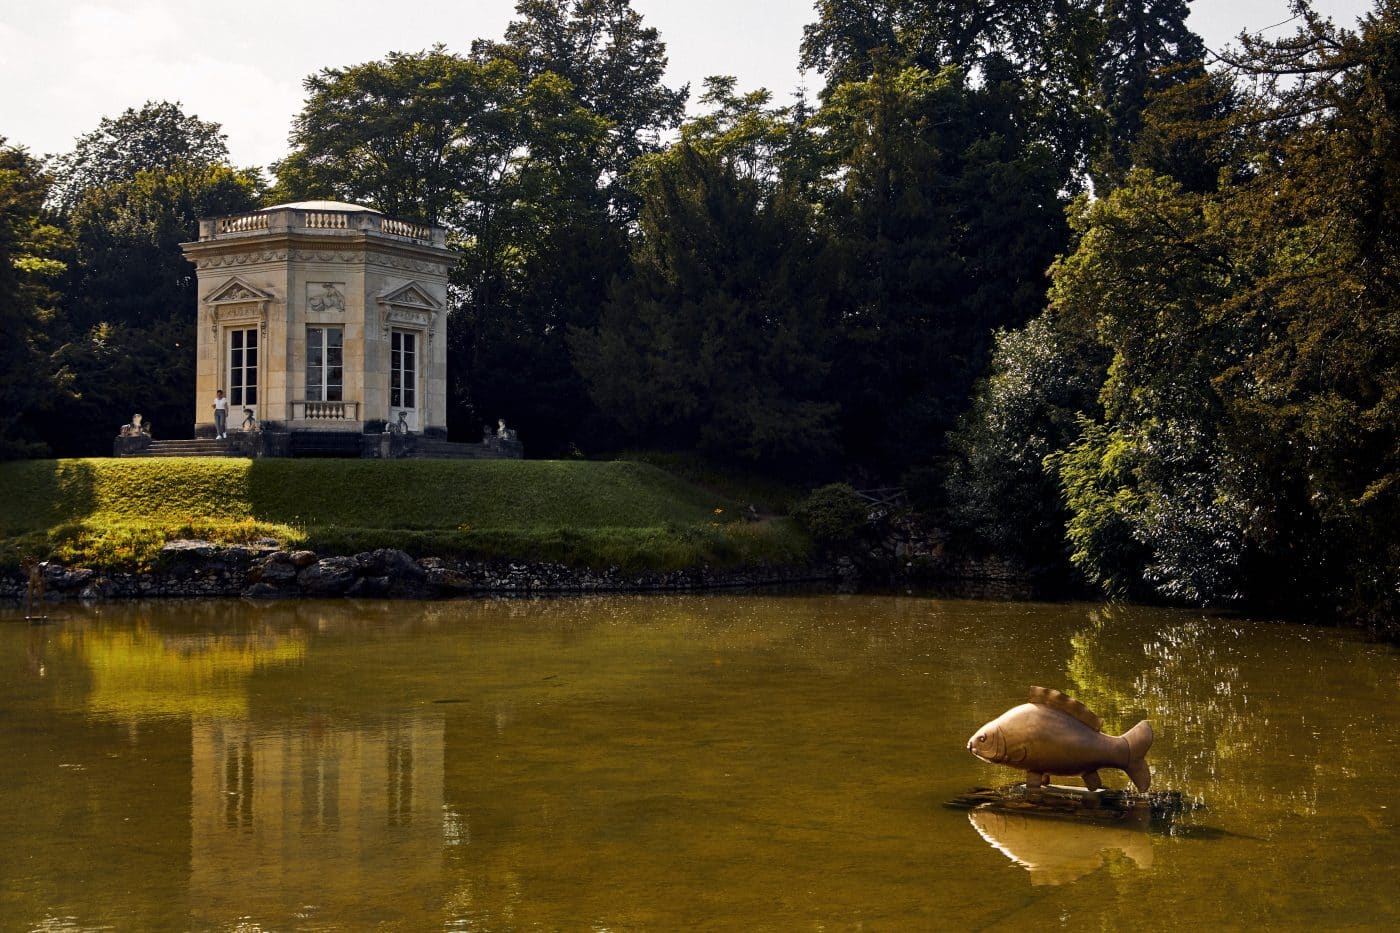 Golden carp statue in a pond at Versailles by French artist and designer François-Xavier Lalanne Assouline book Lalanne: A World of Poetry